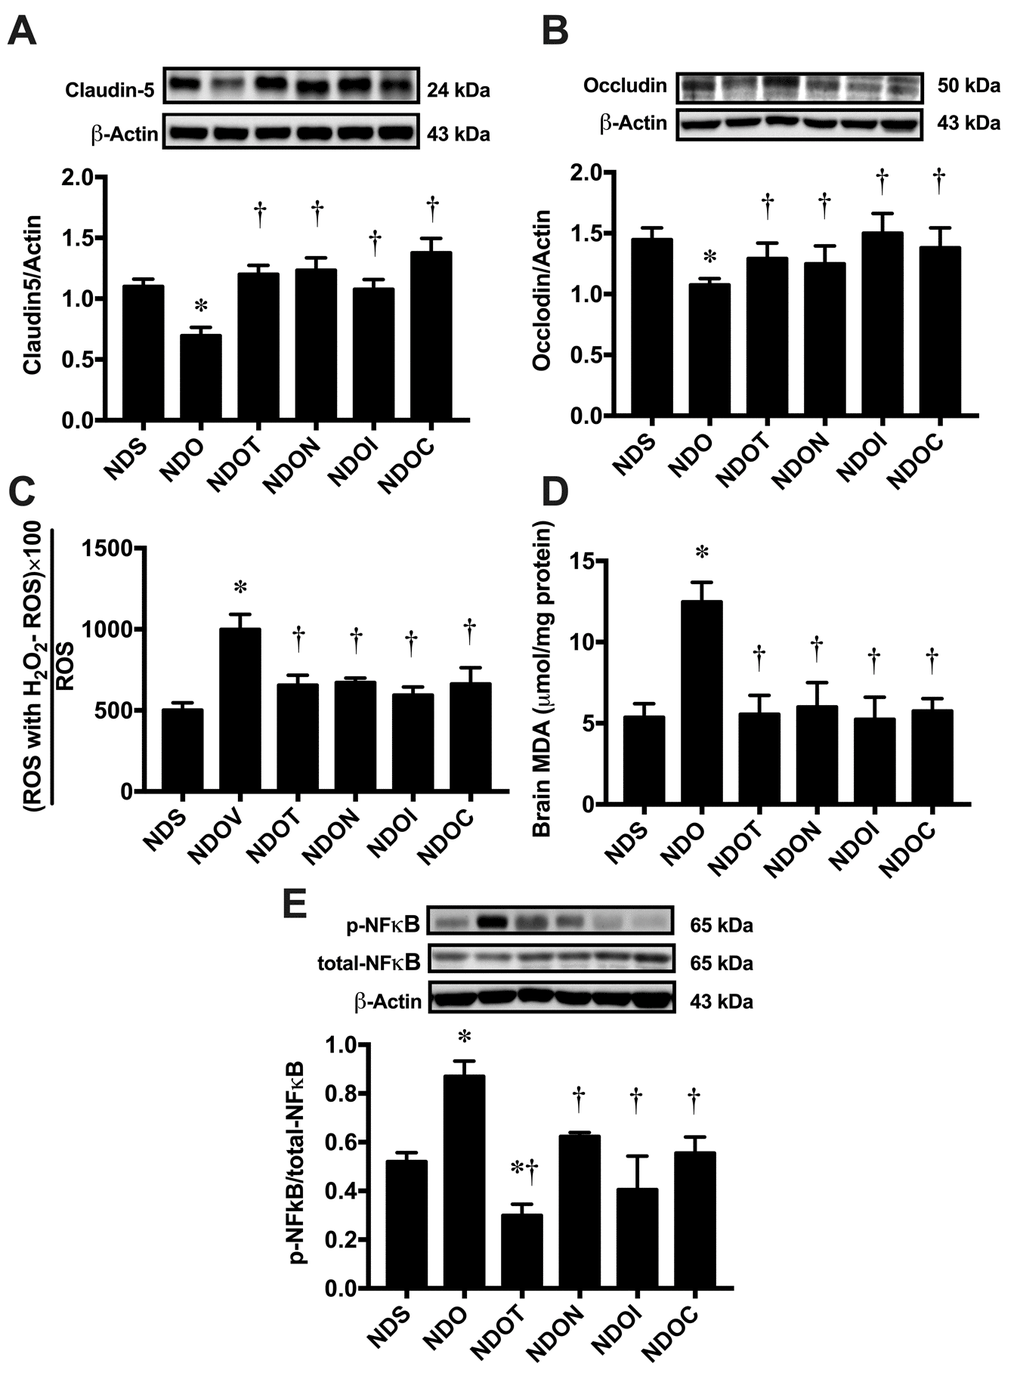 The effects of NAC, inulin and combined therapy on blood-brain barrier integrity, hippocampal oxidative stress and hippocampal inflammation in rats with Testosterone deprivation. (A) Upper panels: the representative bands of claudin-5 blotting. Lower panel: The expression of the hippocampal claudin-5 protein. (B) Upper panels: the representative bands of occludin blotting. Lower panel: The expression of hippocampal occludin protein. (C) Hippocampal oxidative stress as indicated by hippocampal ROS level. (D) Brain oxidative stress as indicated by brain MDA level. (E) Upper panels: the representative bands of p-NFĸb, total-NFĸB and actin. Lower panel: The expression of p-NFĸb per total-NFĸB ratio. NDS: rats with sham operation; NDO: rats with orchiectomy; NDOT: rats with orchiectomy receiving testosterone replacement; NDON: rats with orchiectomy receiving NAC treatment; NDOI: rats with orchiectomy receiving inulin treatment; NDOC: rats with orchiectomy receiving a combined therapy (the combination of NAC and inulin) (N=6 of each group) *p